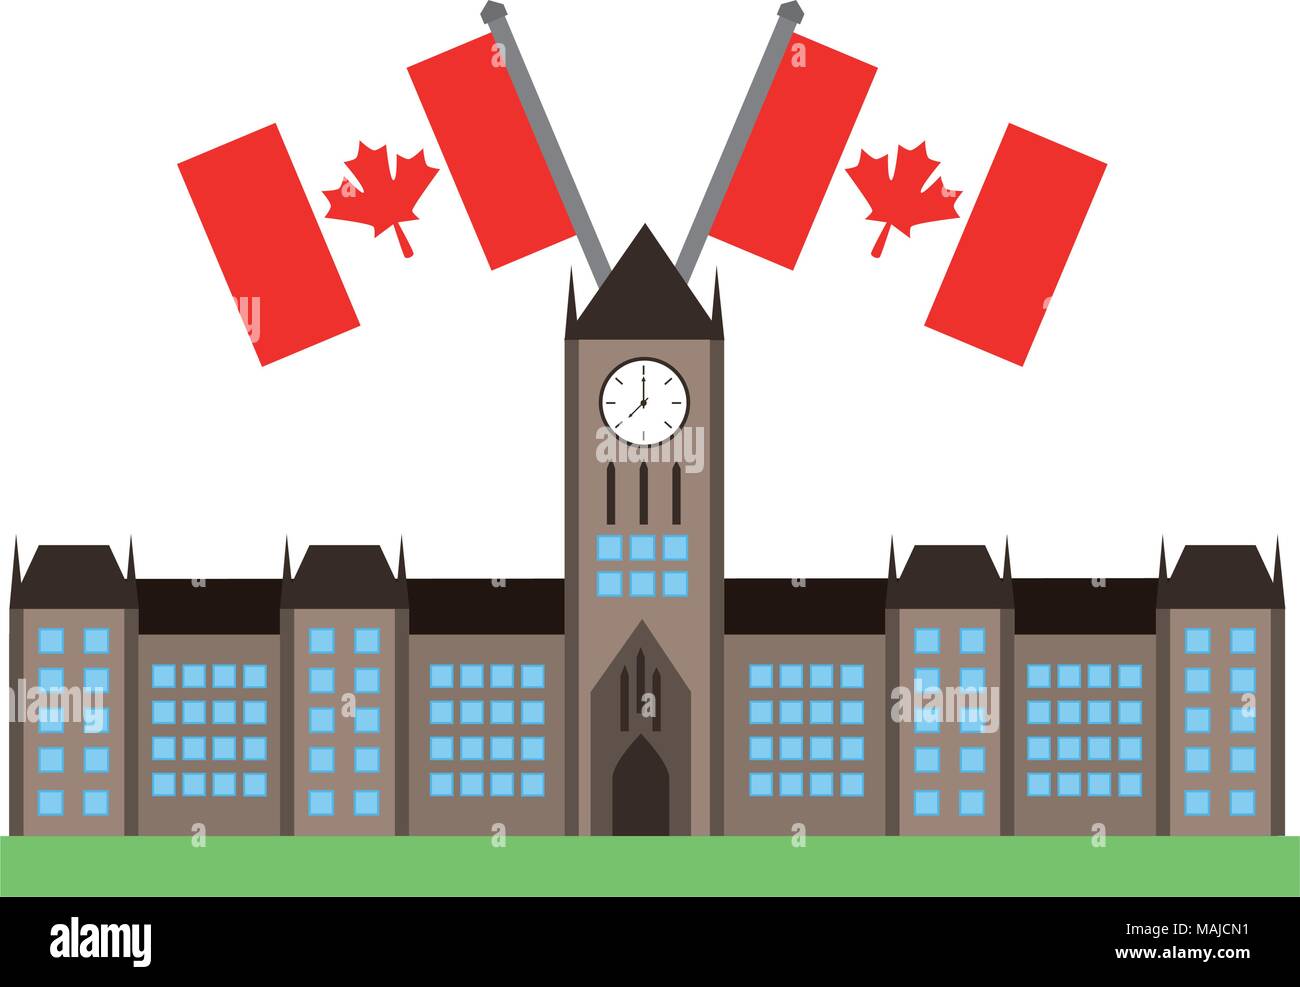 ottawa parliament building with canadian flags vector illustration desing Stock Vector